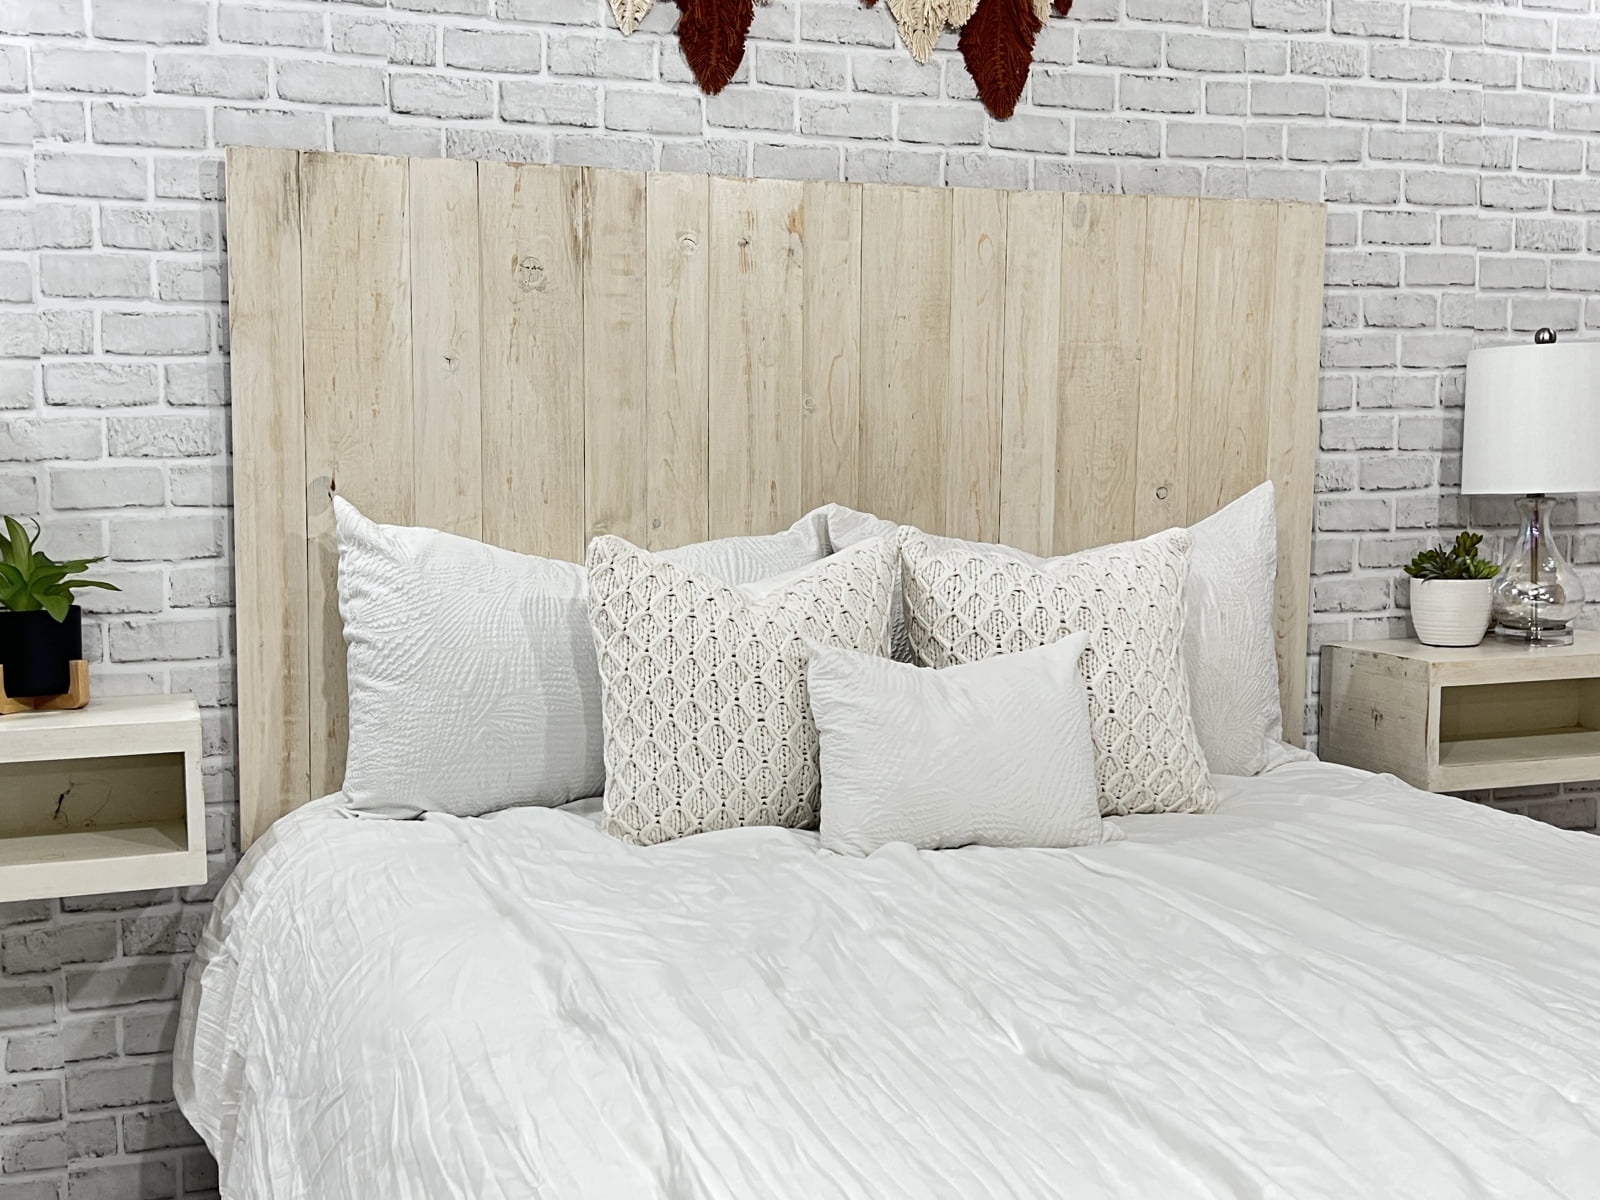 Mounts on Wall. Hanger Style Farmhouse Mix Headboard Handcrafted 